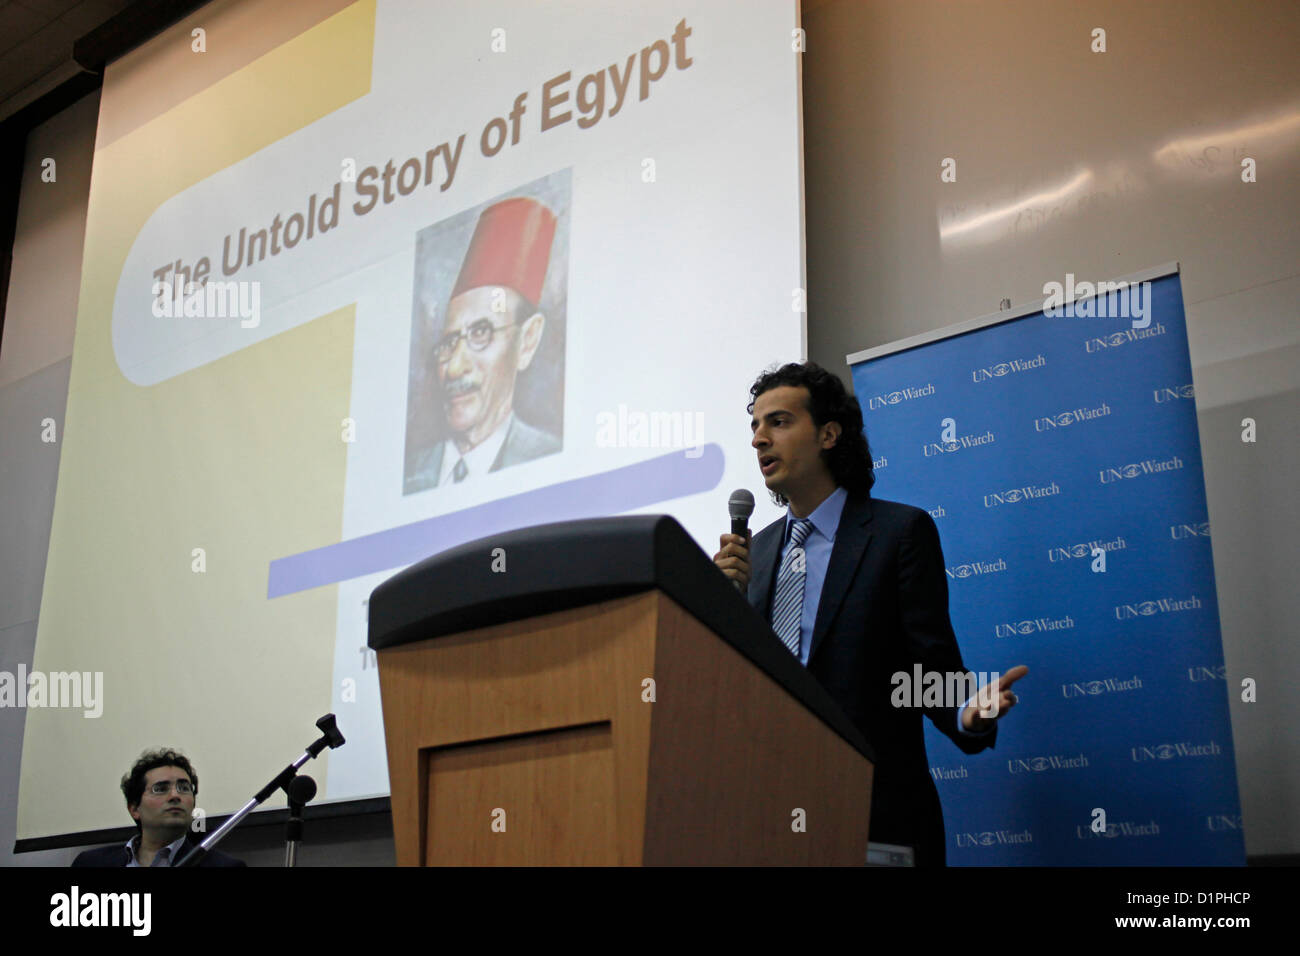 Maikel Nabil Sanad, an Egyptian blogger and political activist carrying a speech in Tel Aviv University on 02 January 2012. Maikel became famous in 2010 for refusing to serve in the Egyptian army, then in 2011 for his role in the Egyptian revolution. He is known for promoting liberal democratic values in Egypt, and campaigning for peaceful relations between Egypt and Israel. Stock Photo